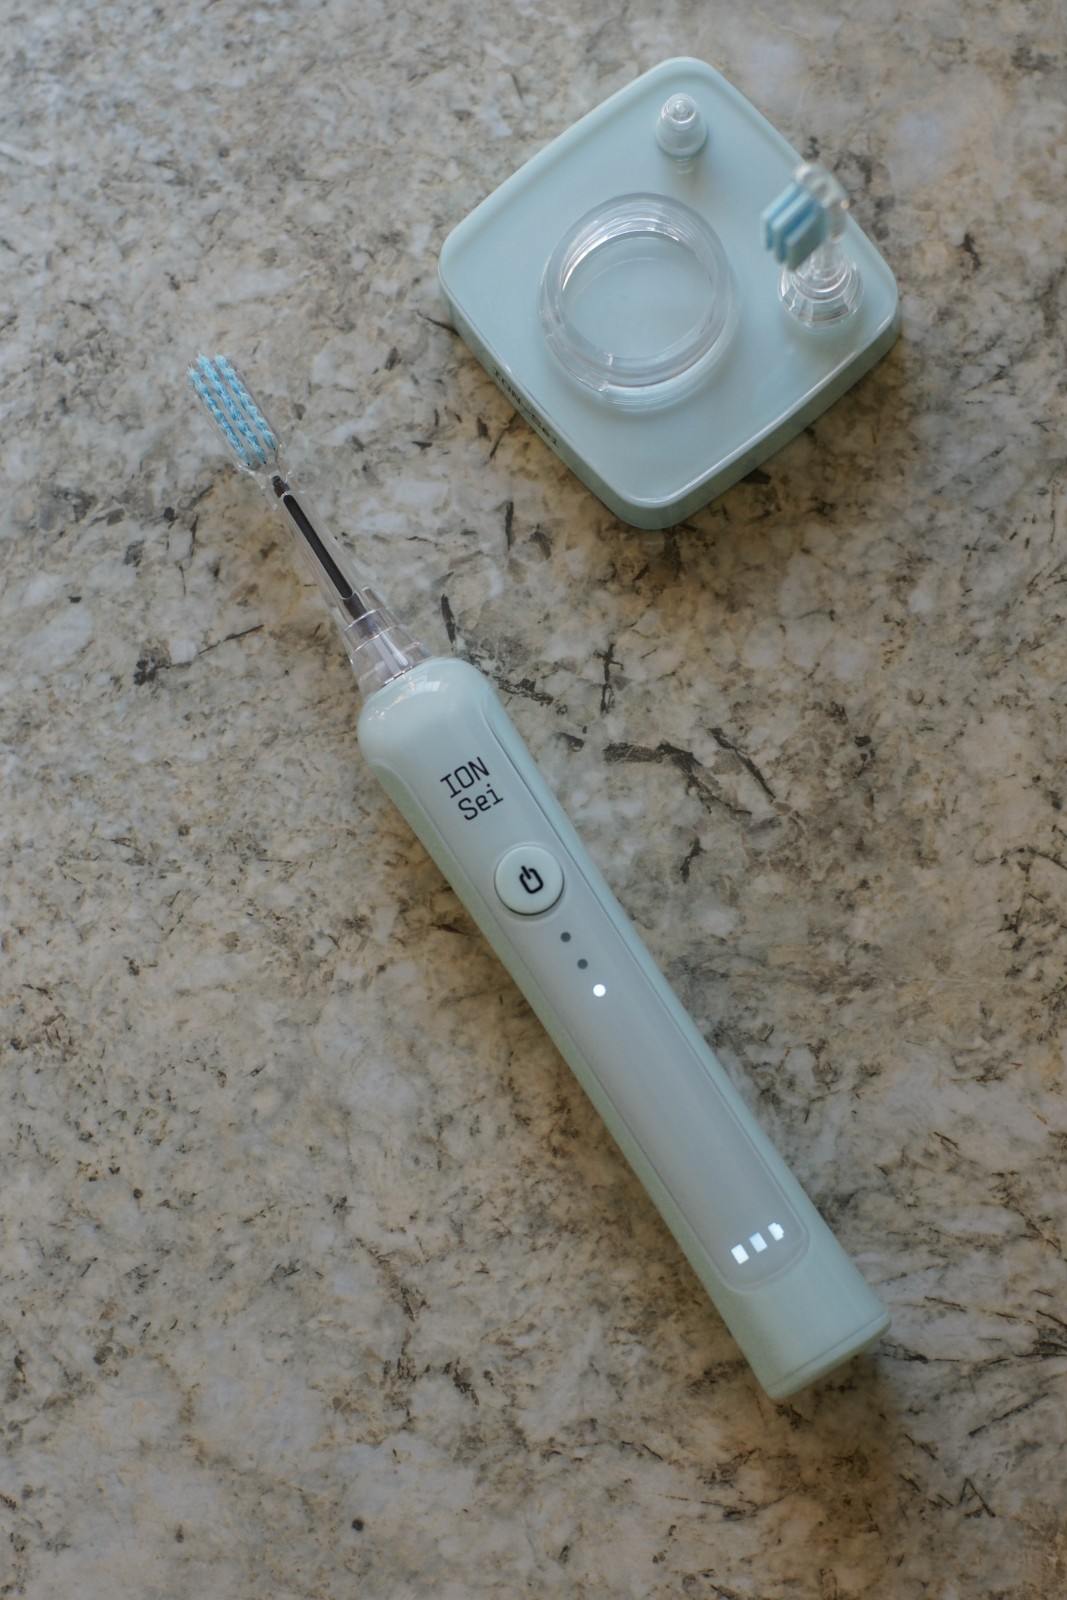 ION-Sei Electric Toothbrush Product Review